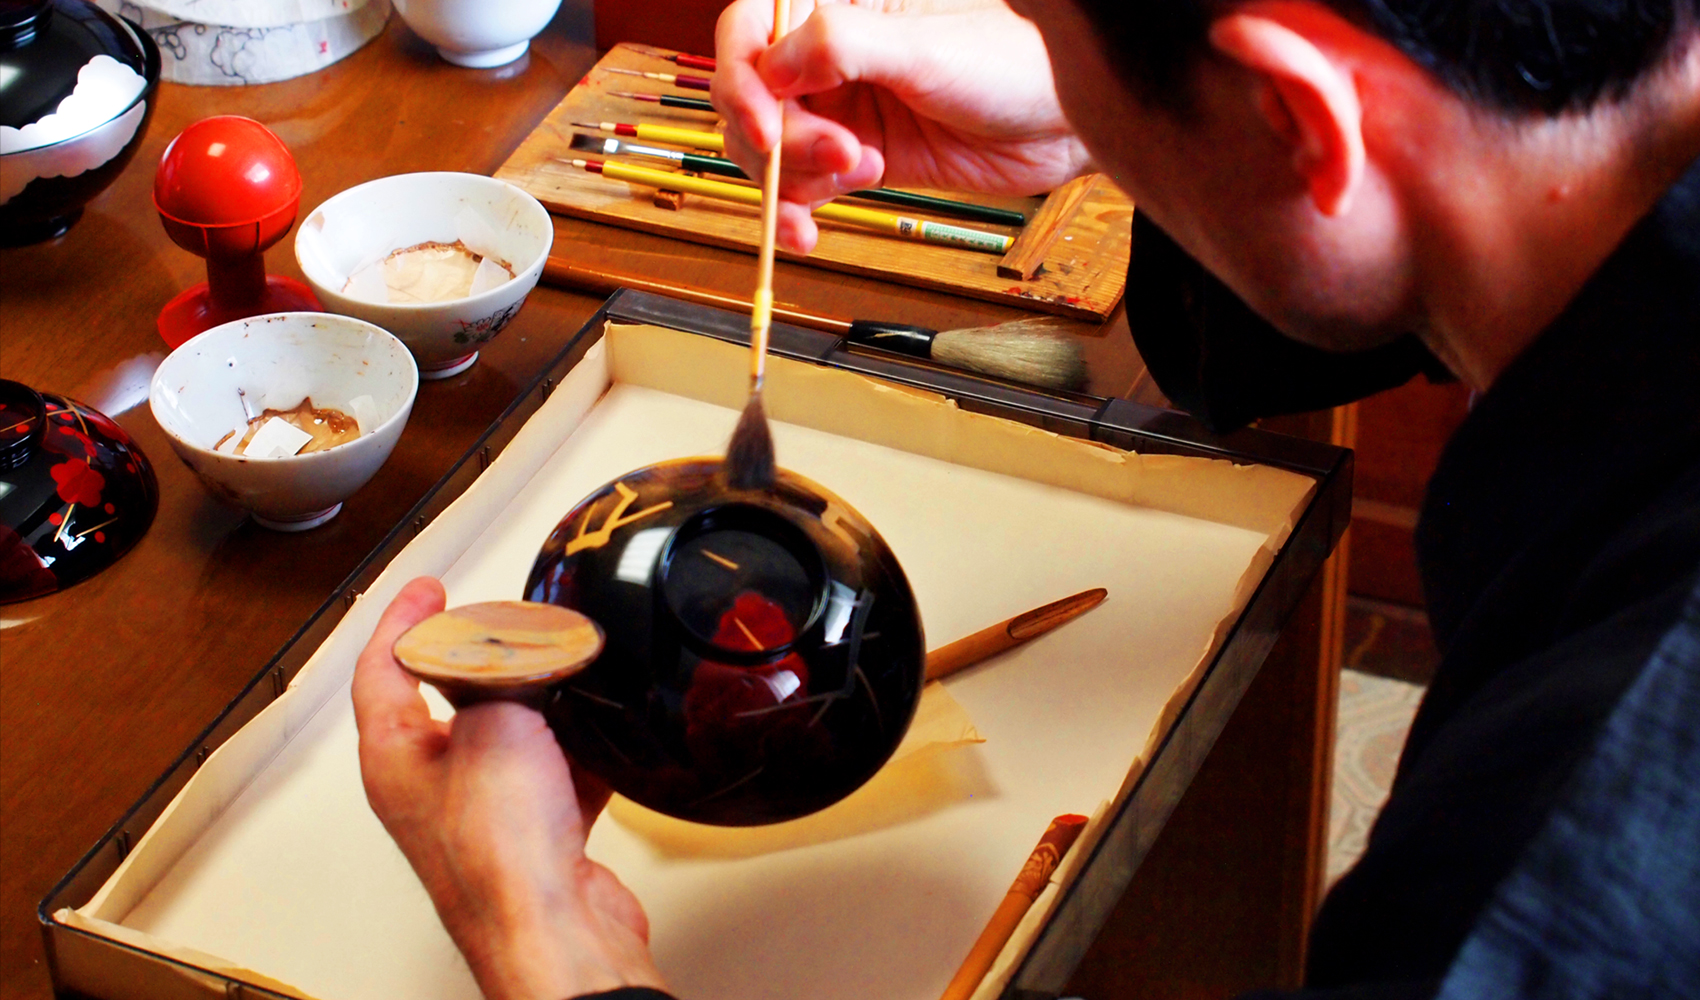 About Lacquerware | YAMADA HEIANDO Lacquerware: Hand-Crafted Imperial Luxury for Japanese Emperor